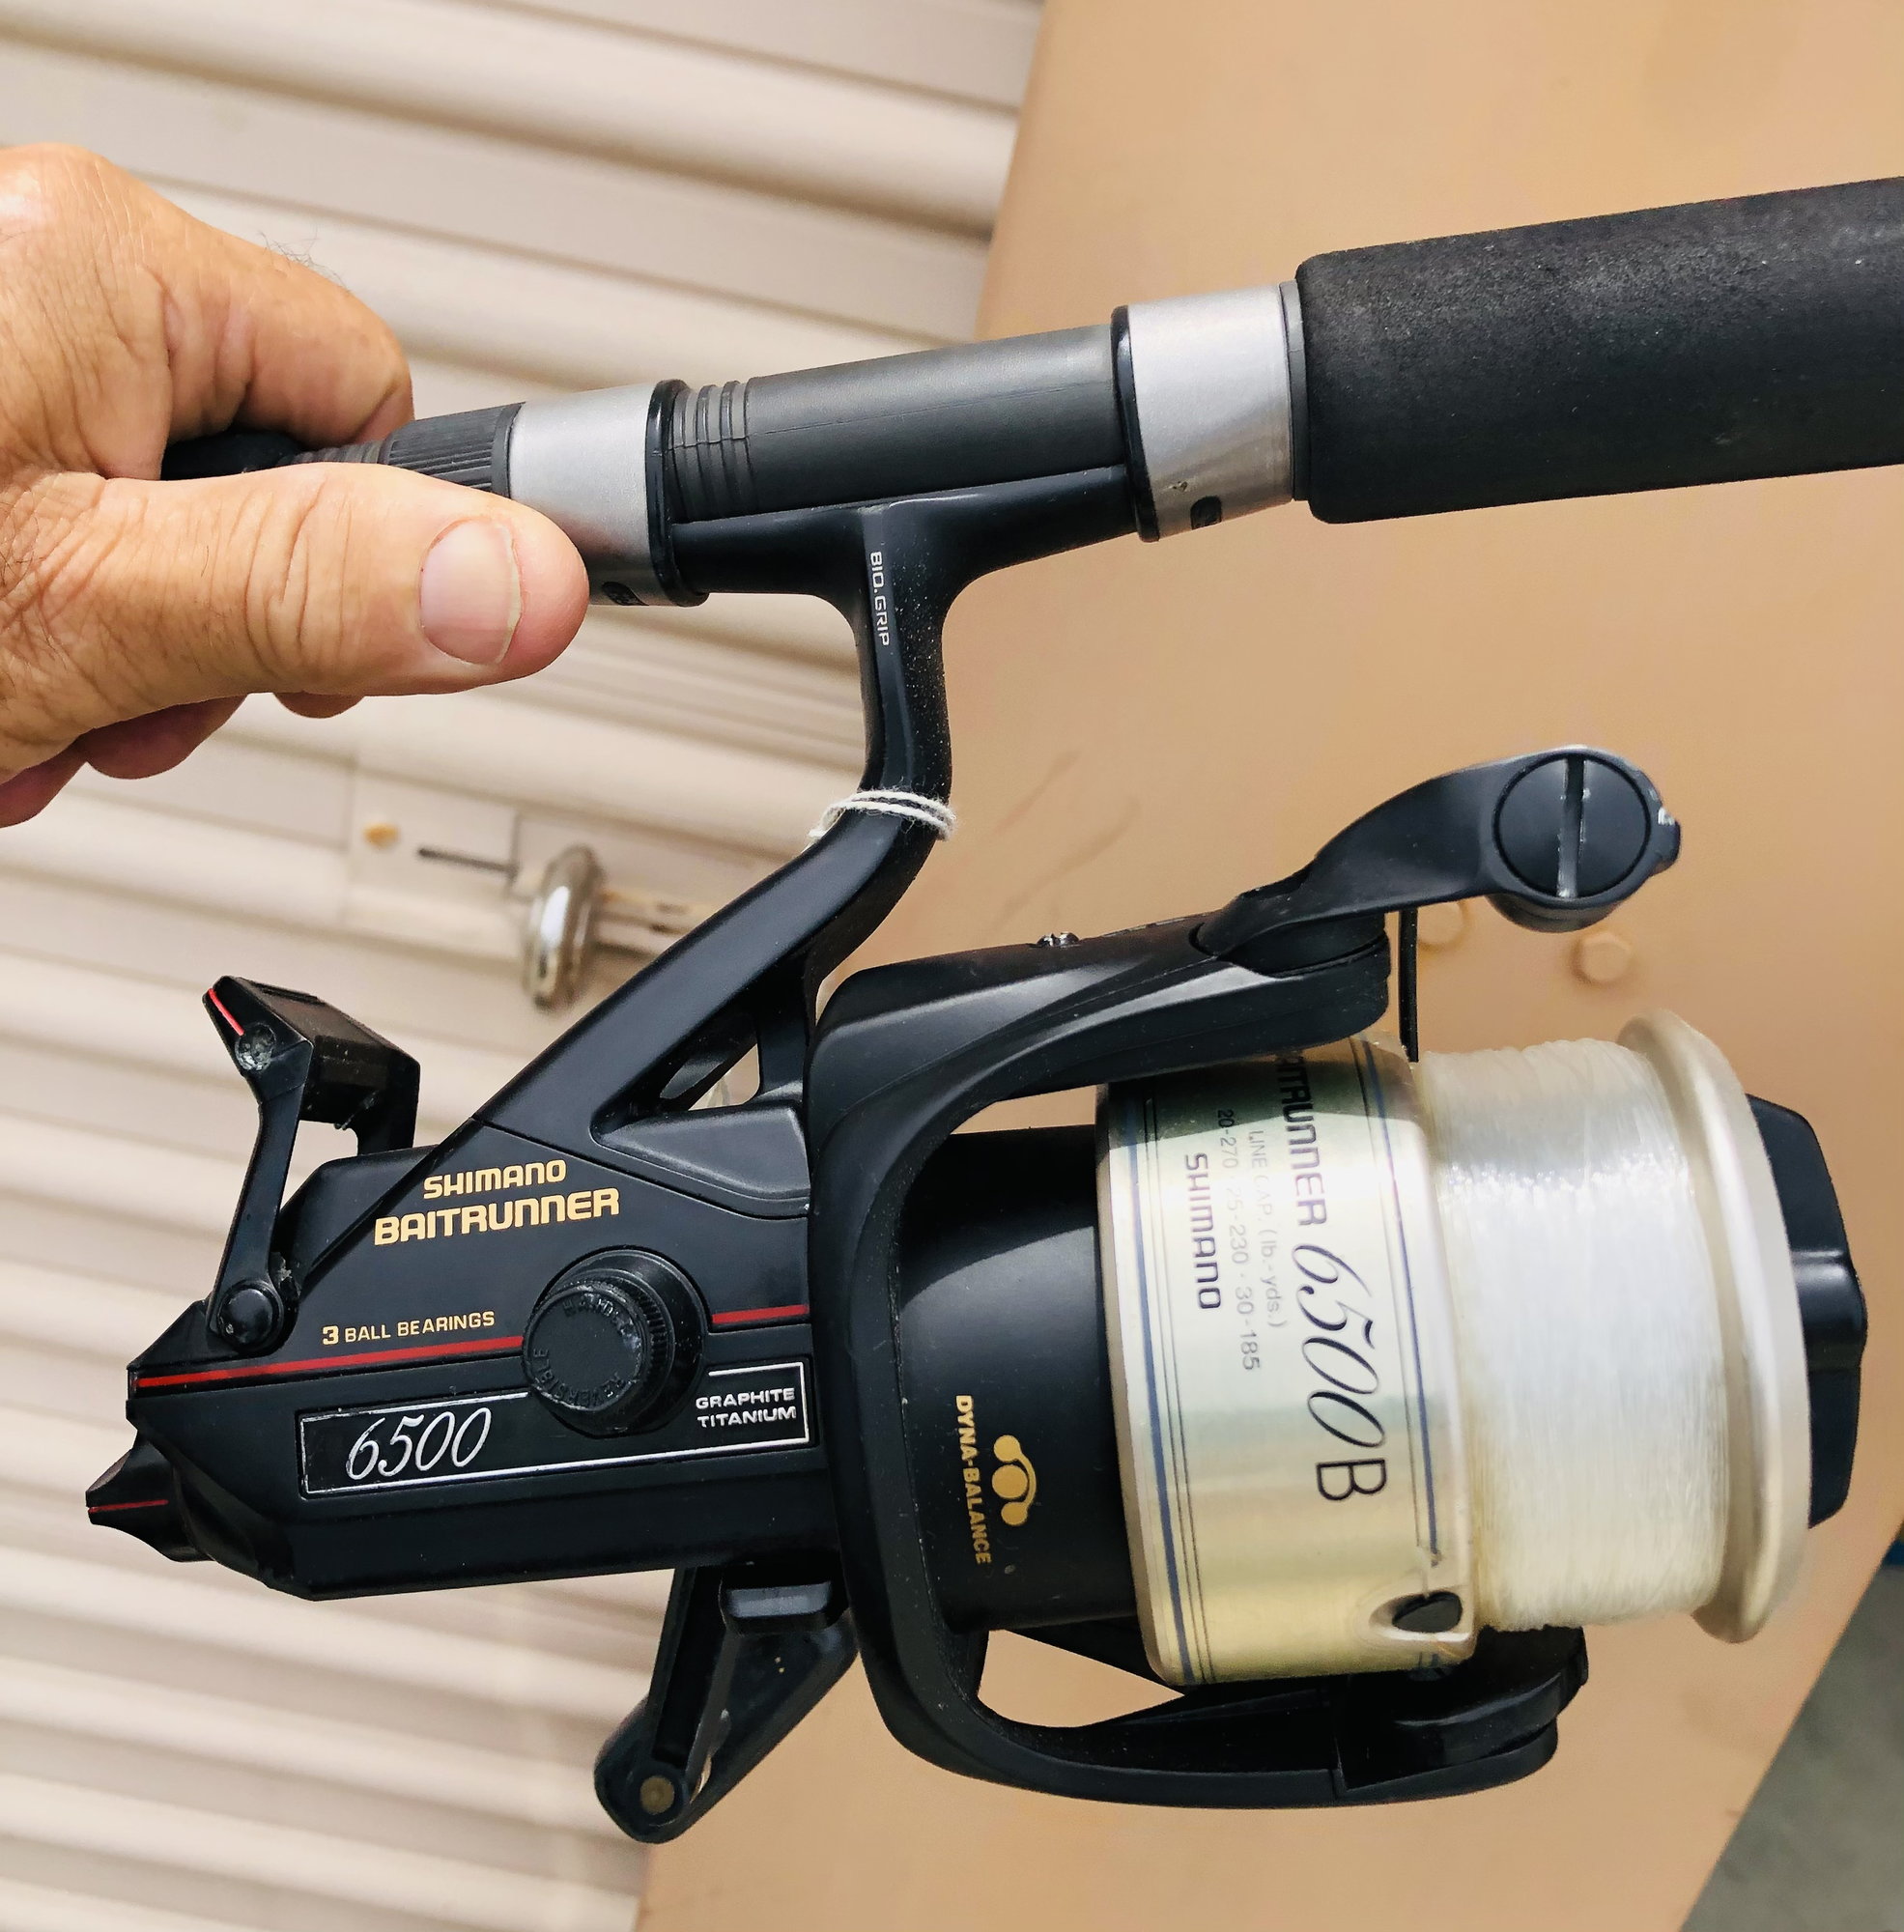 WTB Shimano Baitrunner 6500B for parts - The Hull Truth - Boating and  Fishing Forum